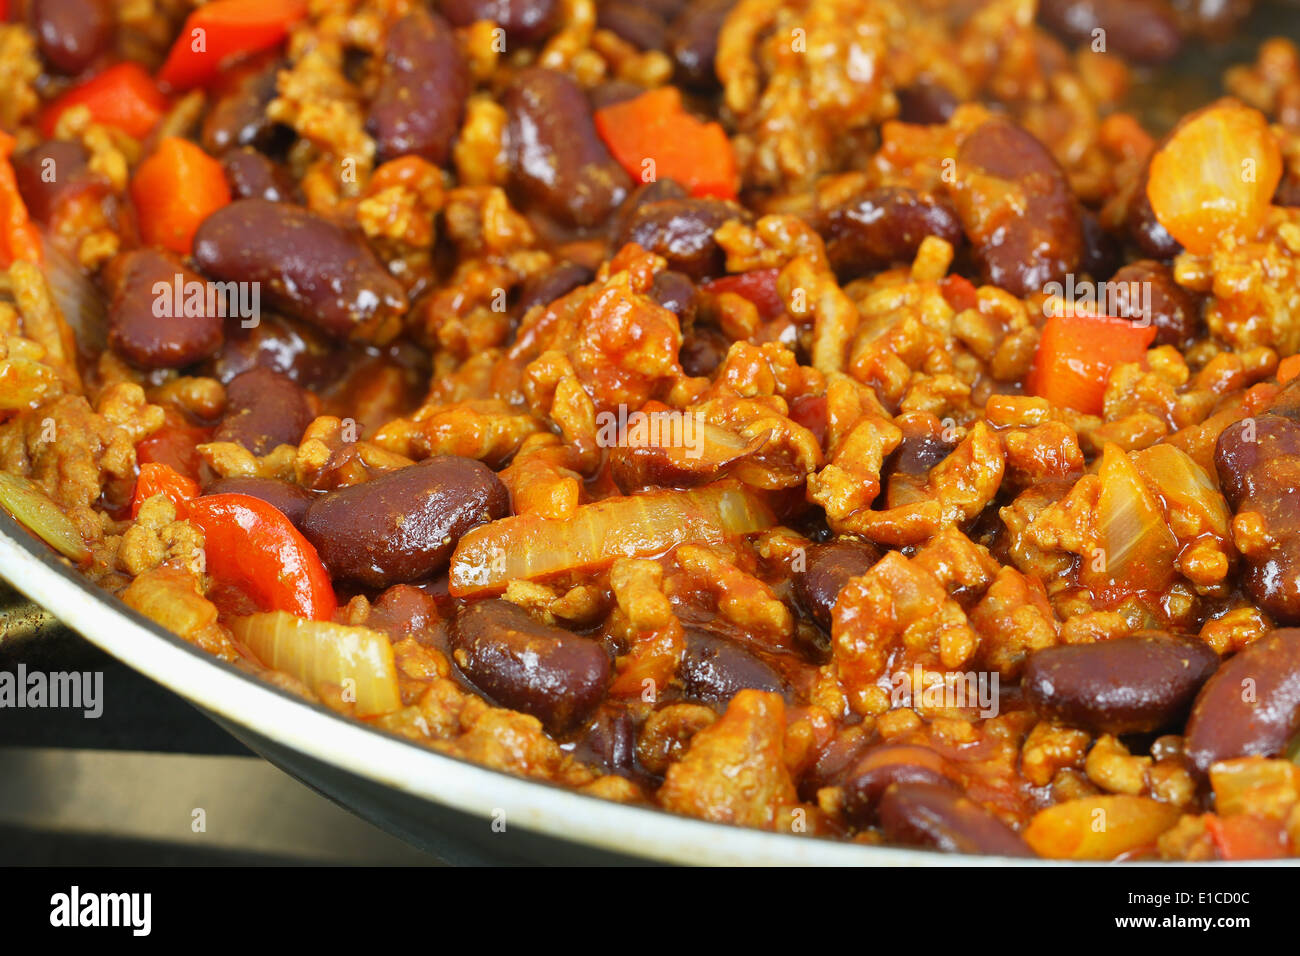 Chili con carne in frying pan, close up Stock Photo